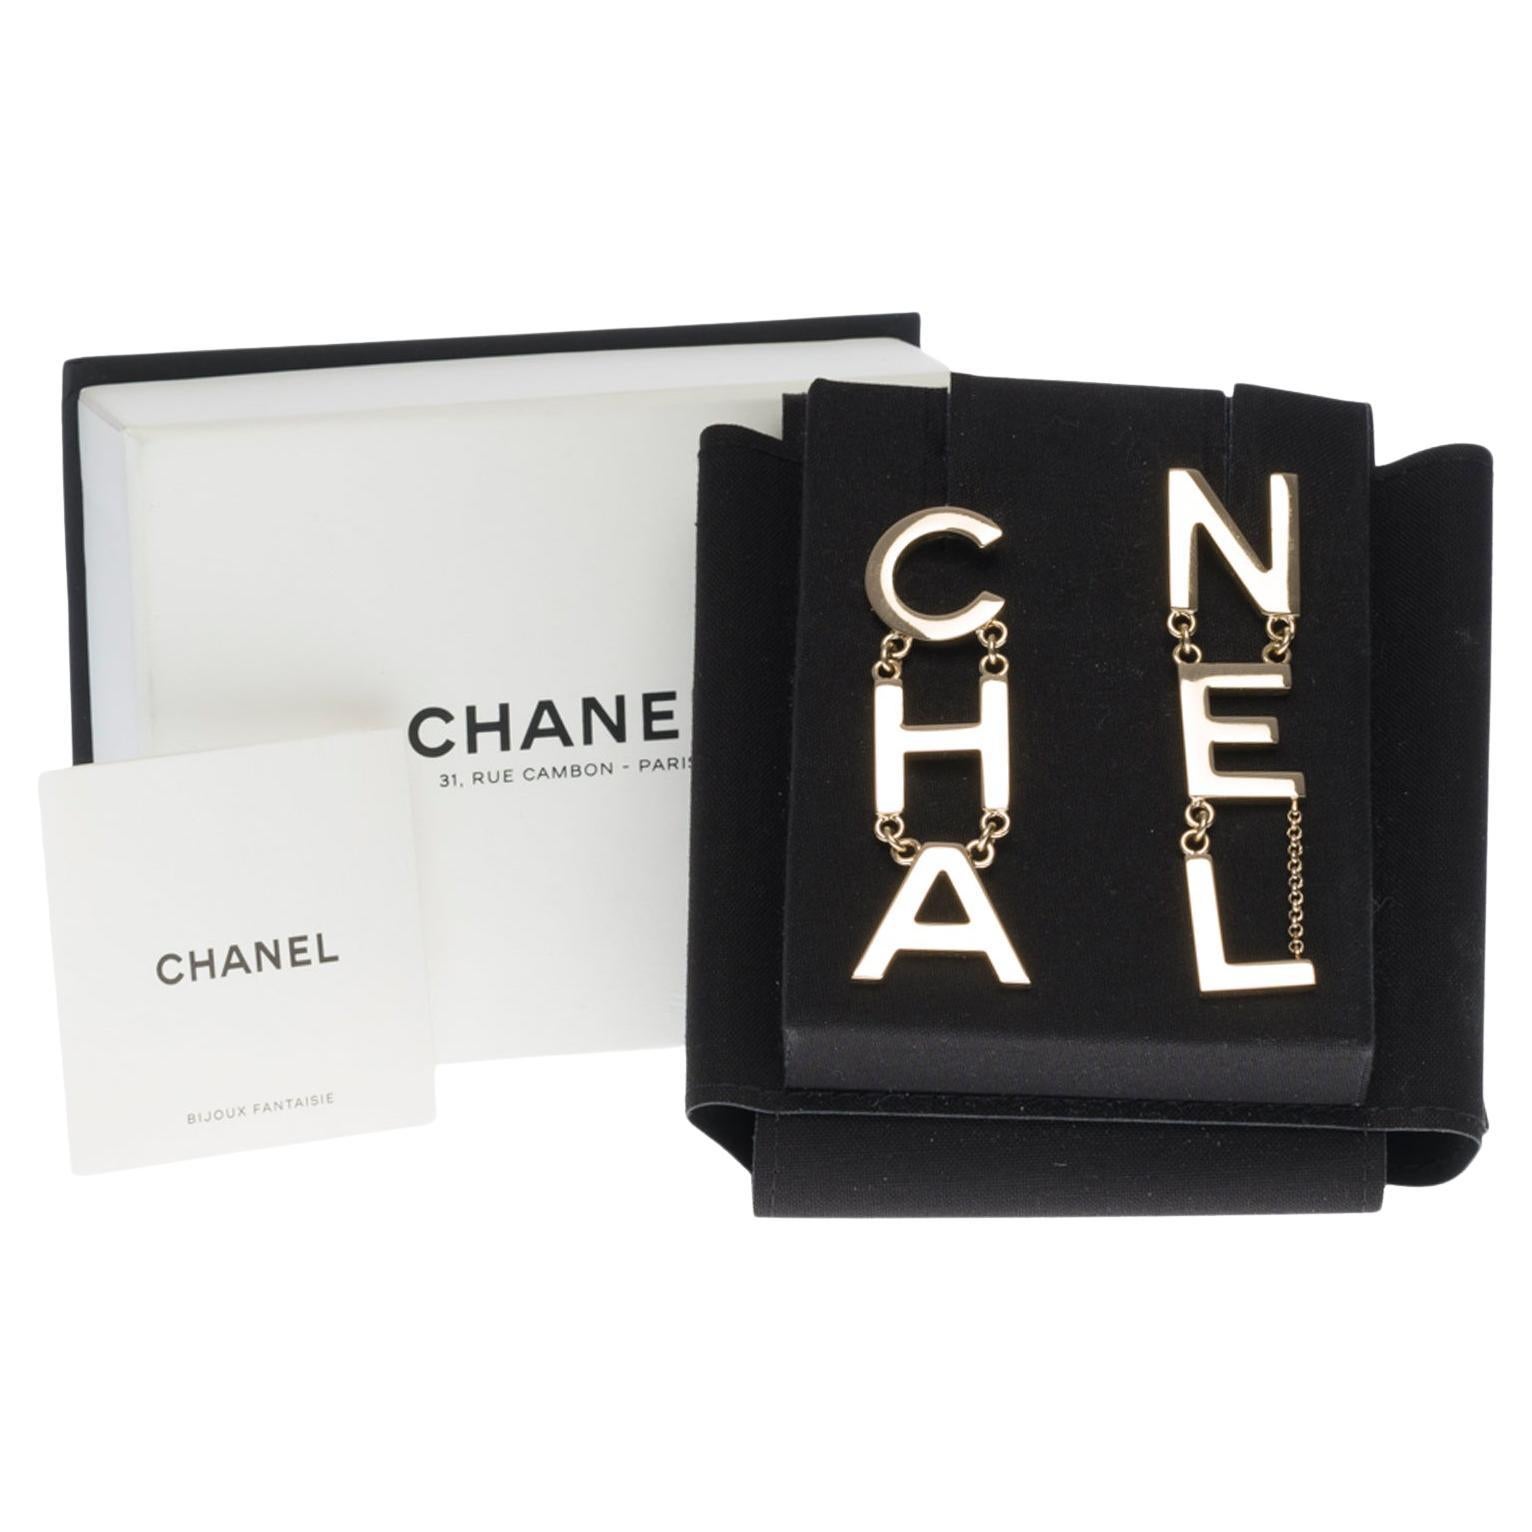 Chanel Earrings Cha Nel - For Sale on 1stDibs  cha nel chanel earrings,  cha nel earrings, chanel earrings cha and nel